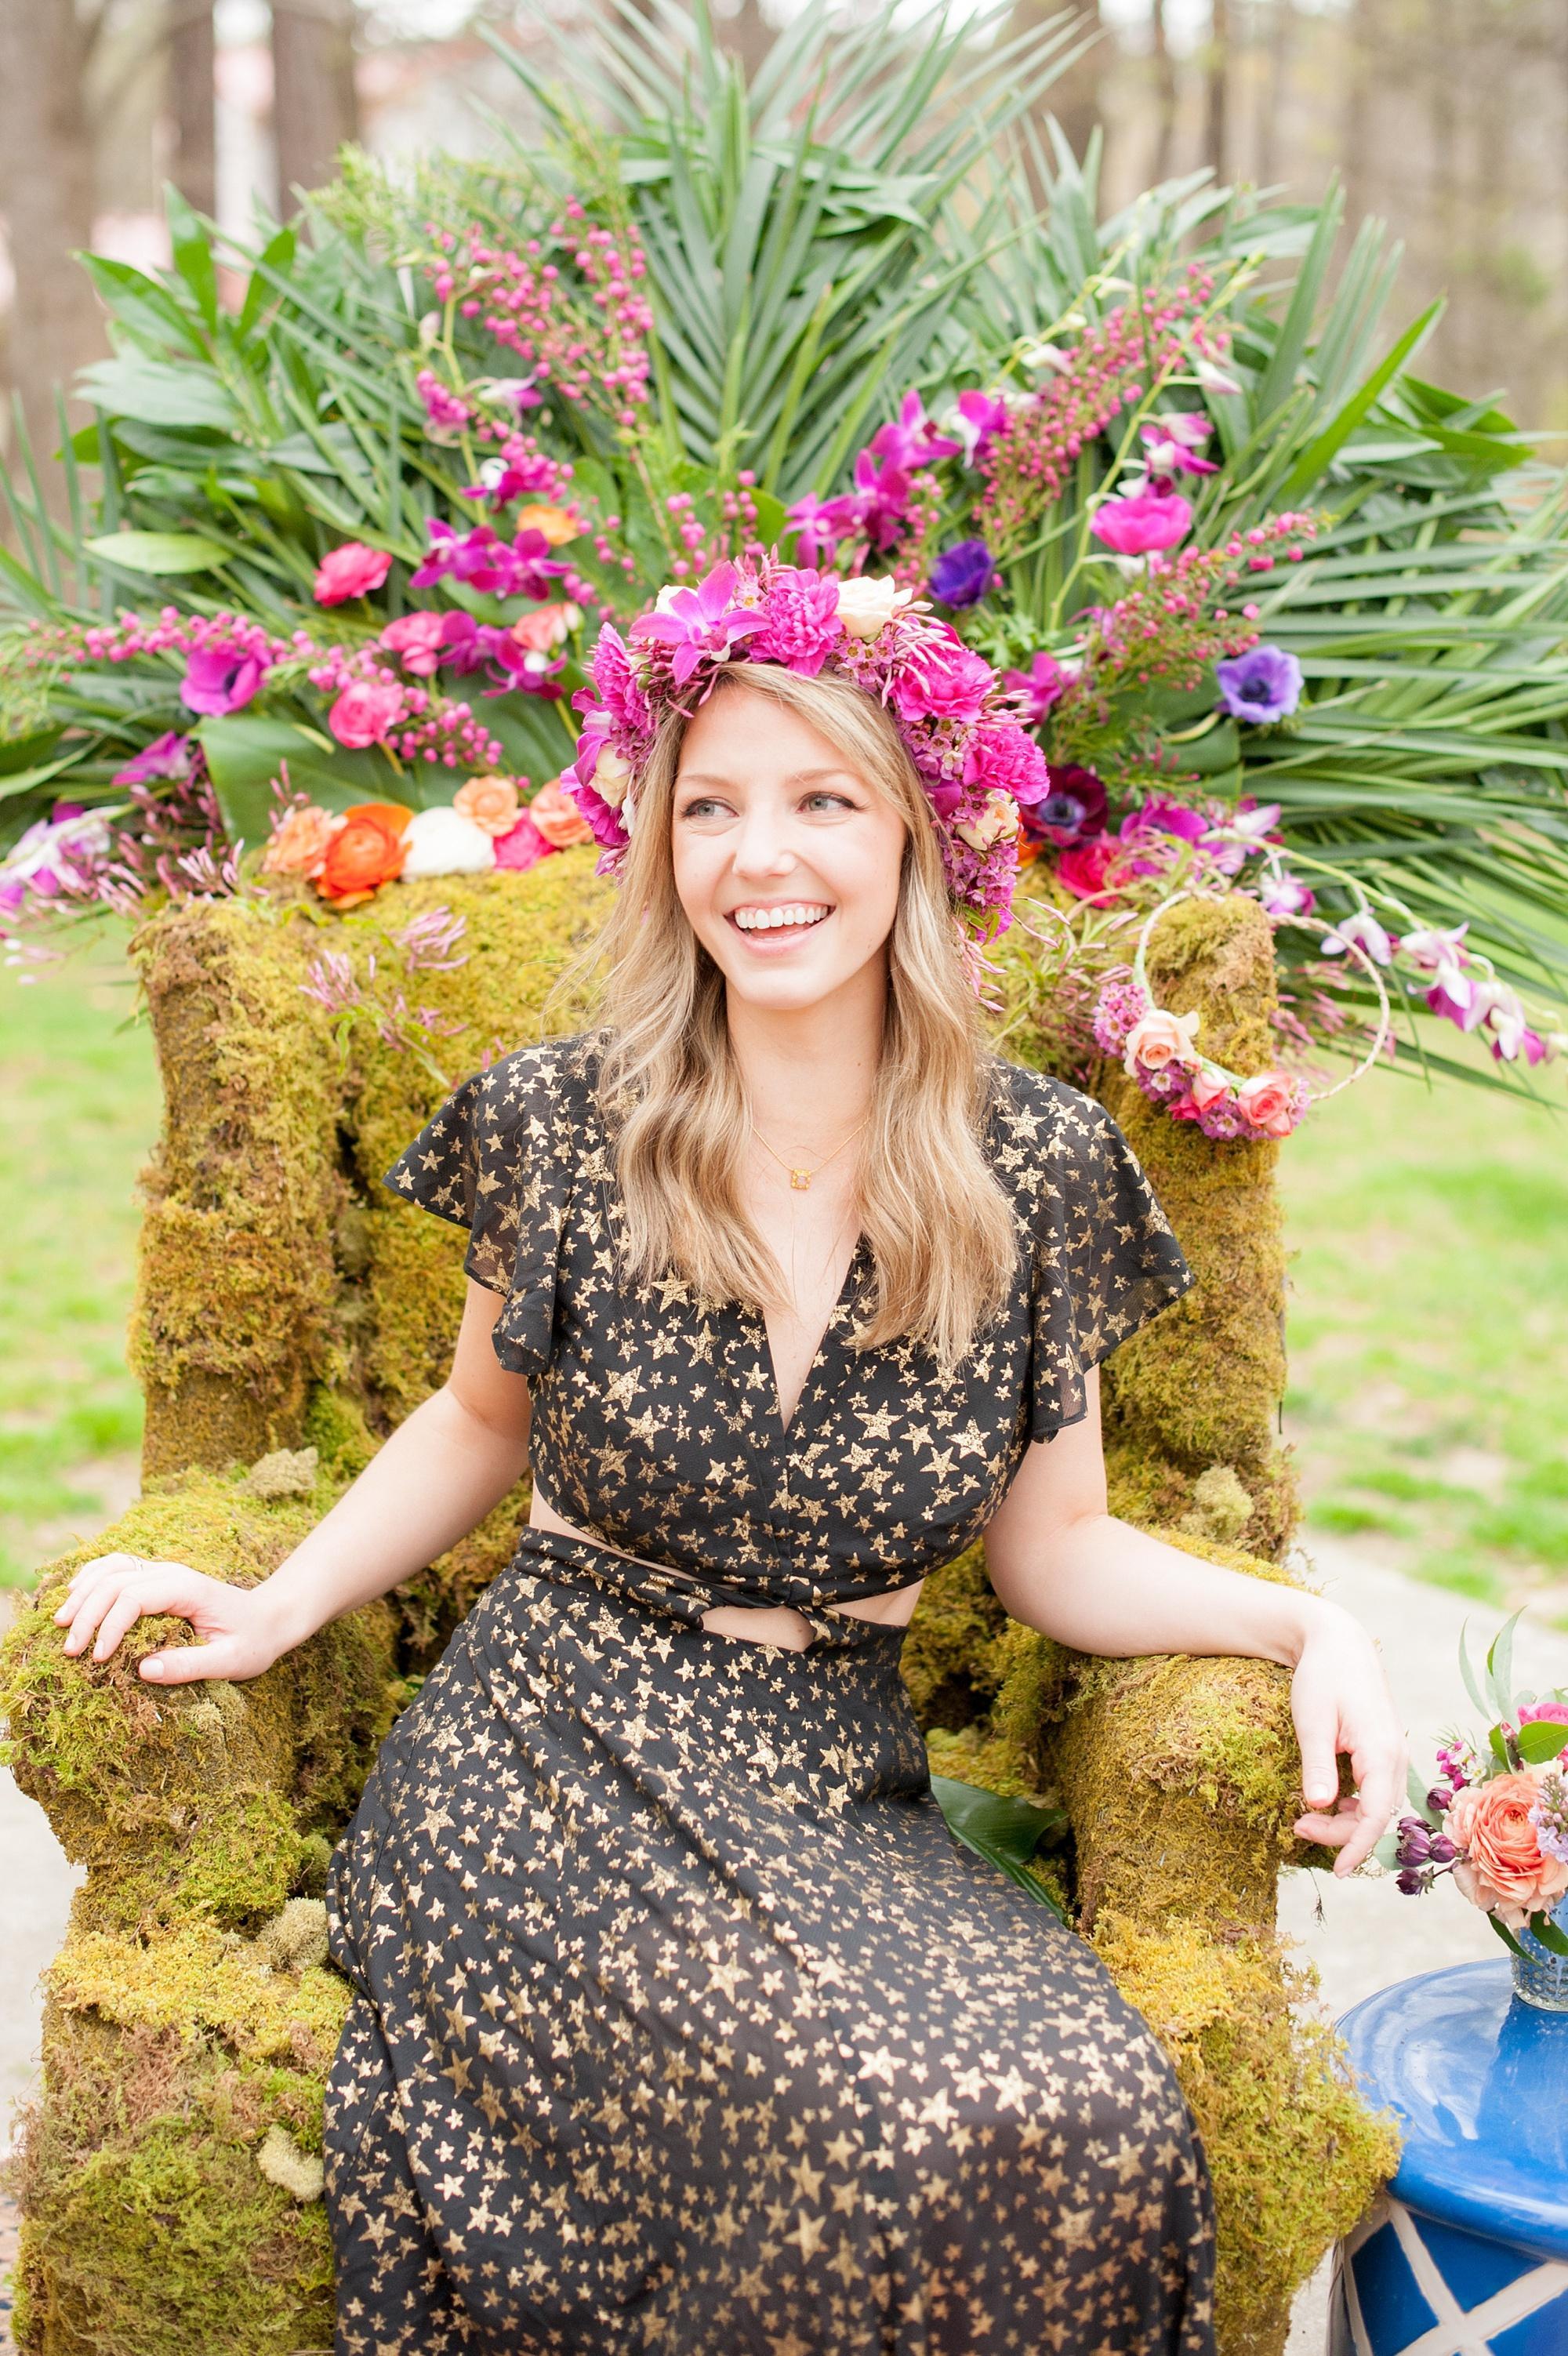 Enchanted garden birthday throne photos. Images by Mikkel Paige Photography, Raleigh wedding photographer.